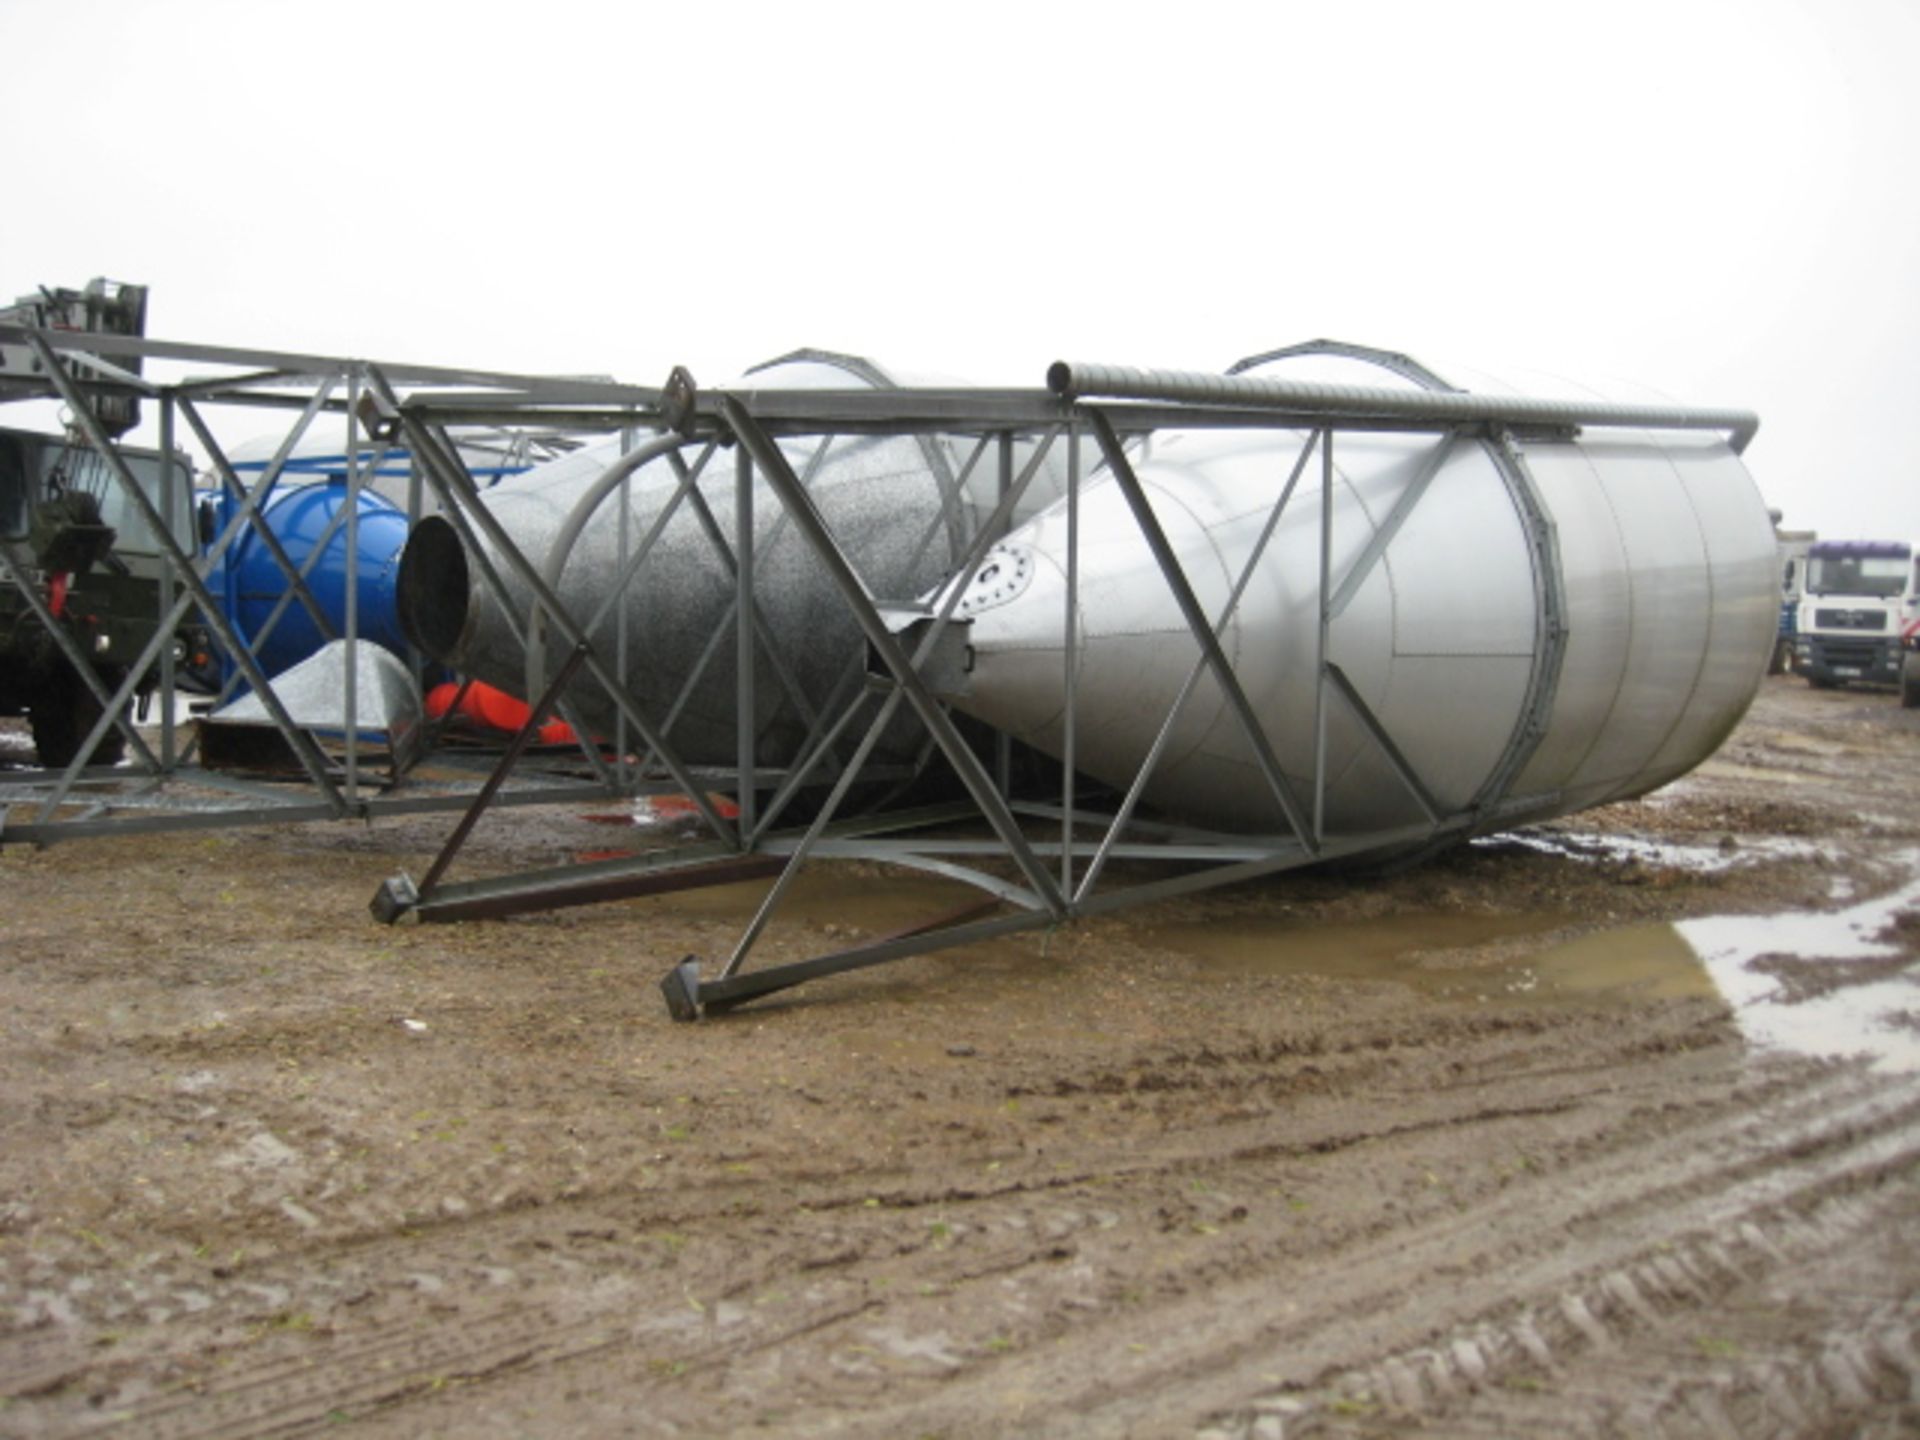 Feed Bins - Feed bins of various sizes. (9 remaining) (UCPE 6346) Price - £4,000 each. Please read - Image 3 of 11